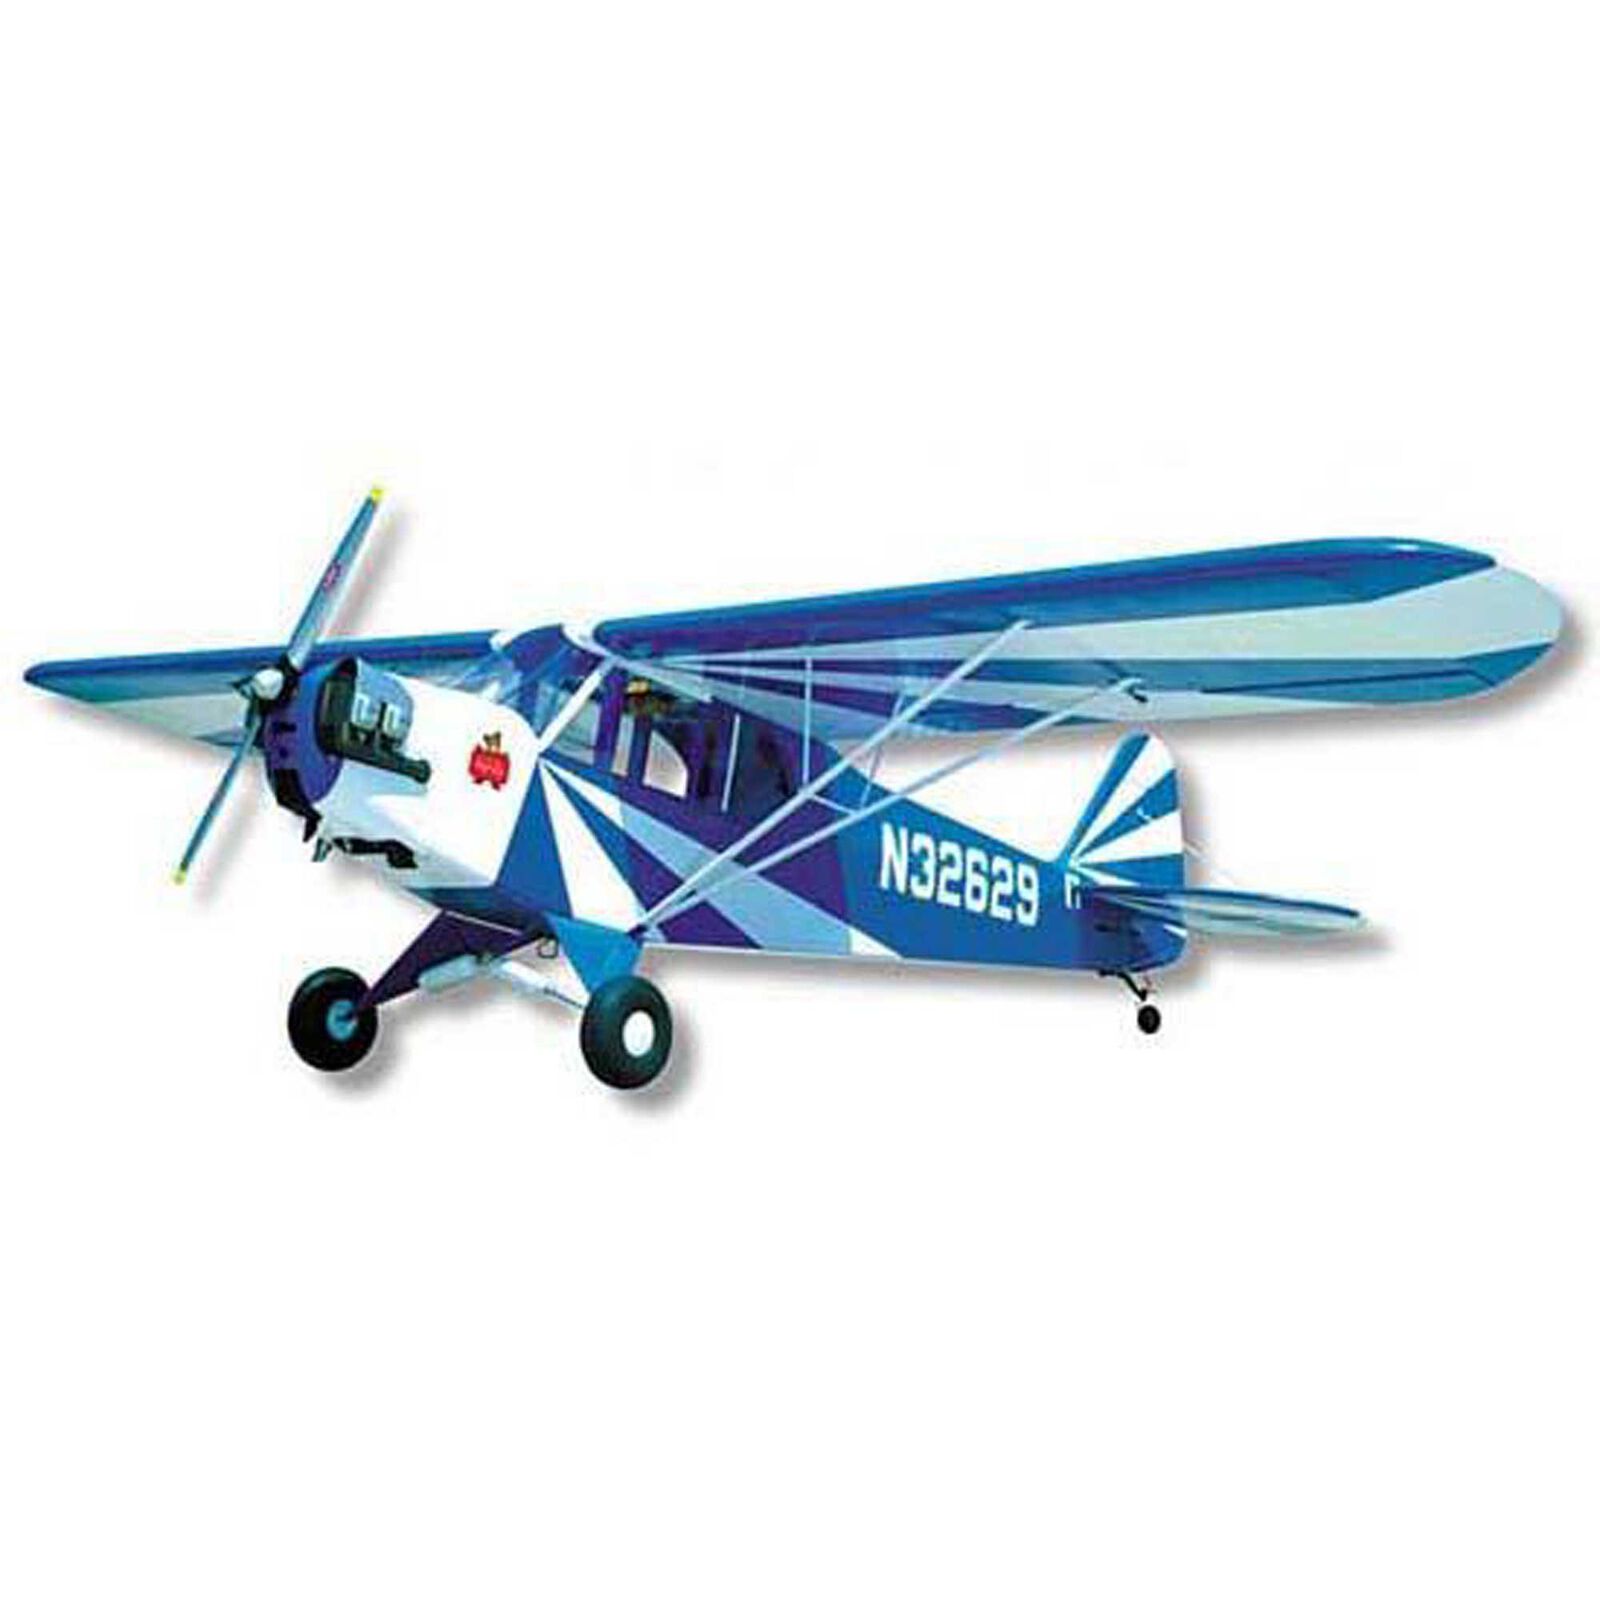 CLIPPED-WING CUB Kit